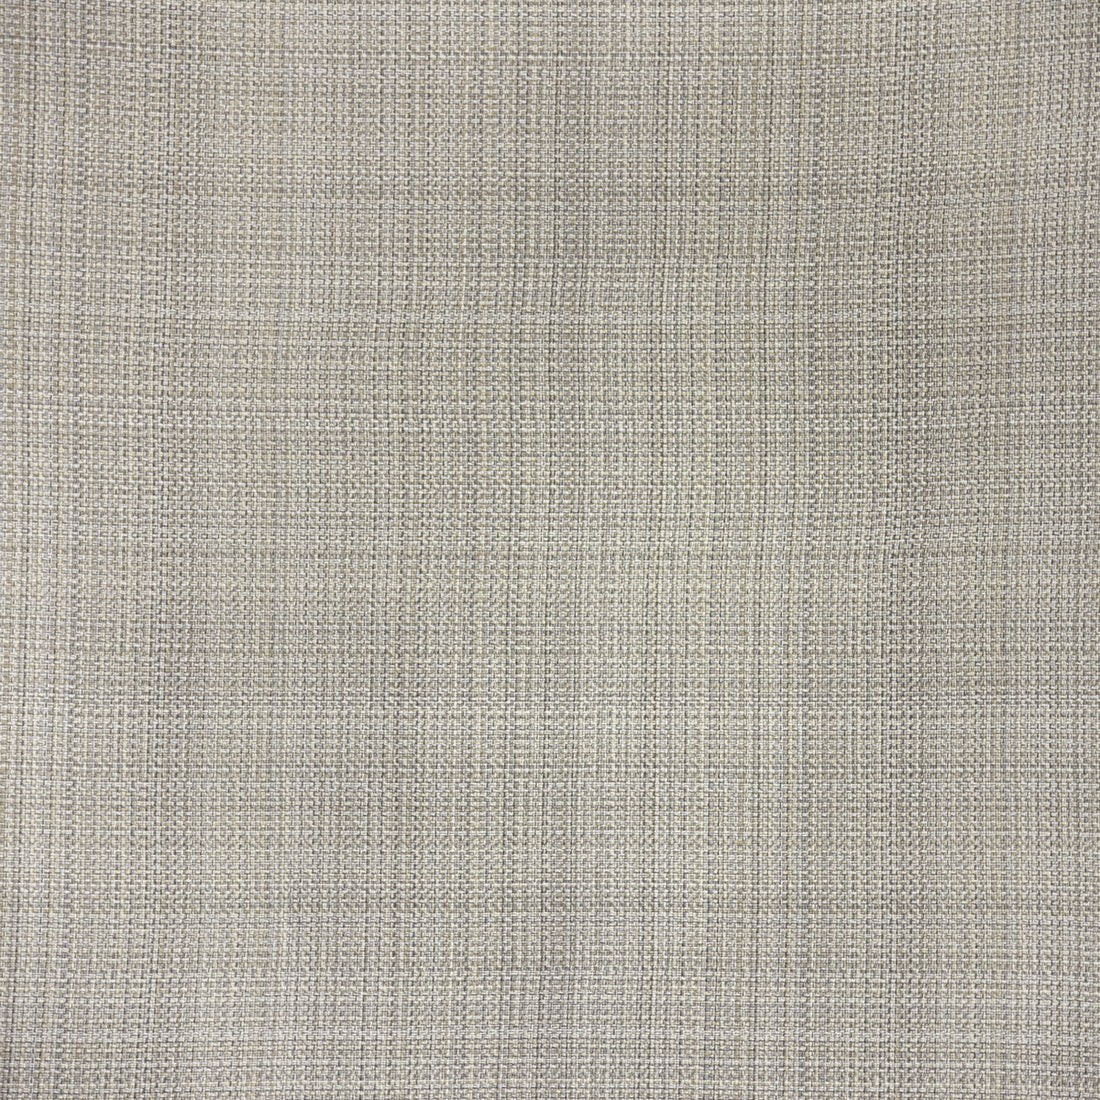 Tailor Made fabric in pebble color - pattern 34932.11.0 - by Kravet Couture in the Modern Tailor collection